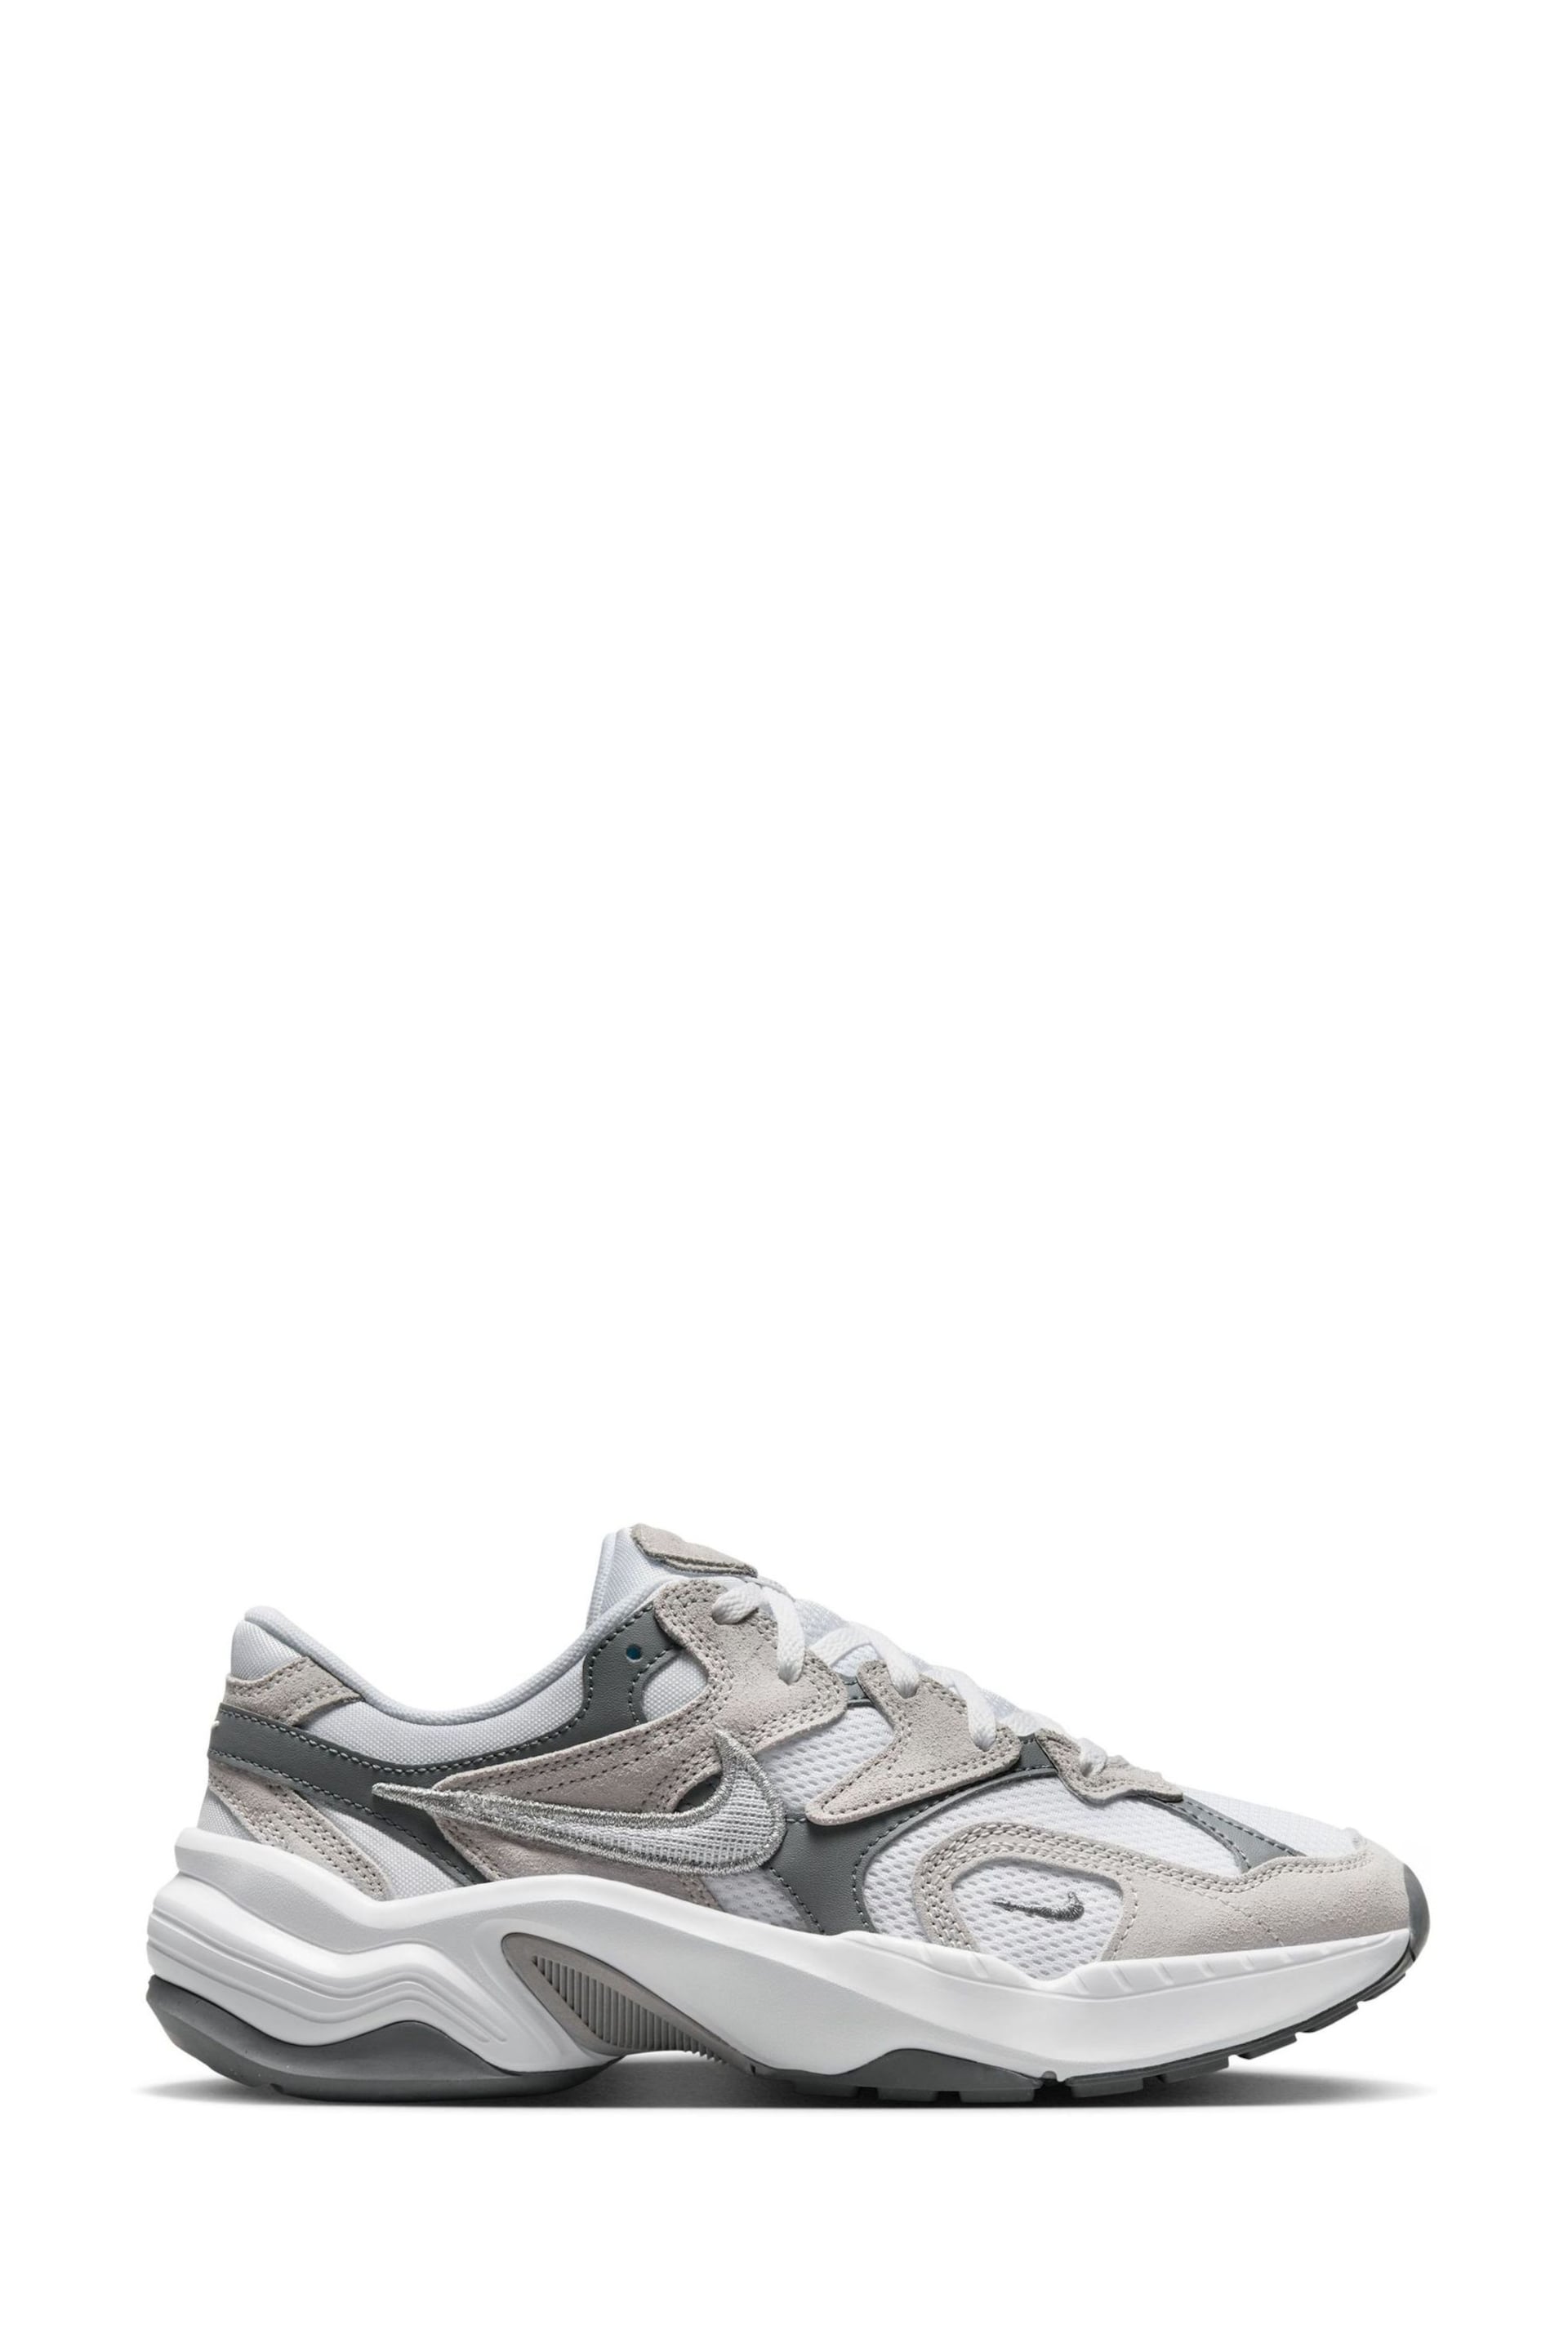 Nike Grey/White AL8 Running Trainers - Image 3 of 13